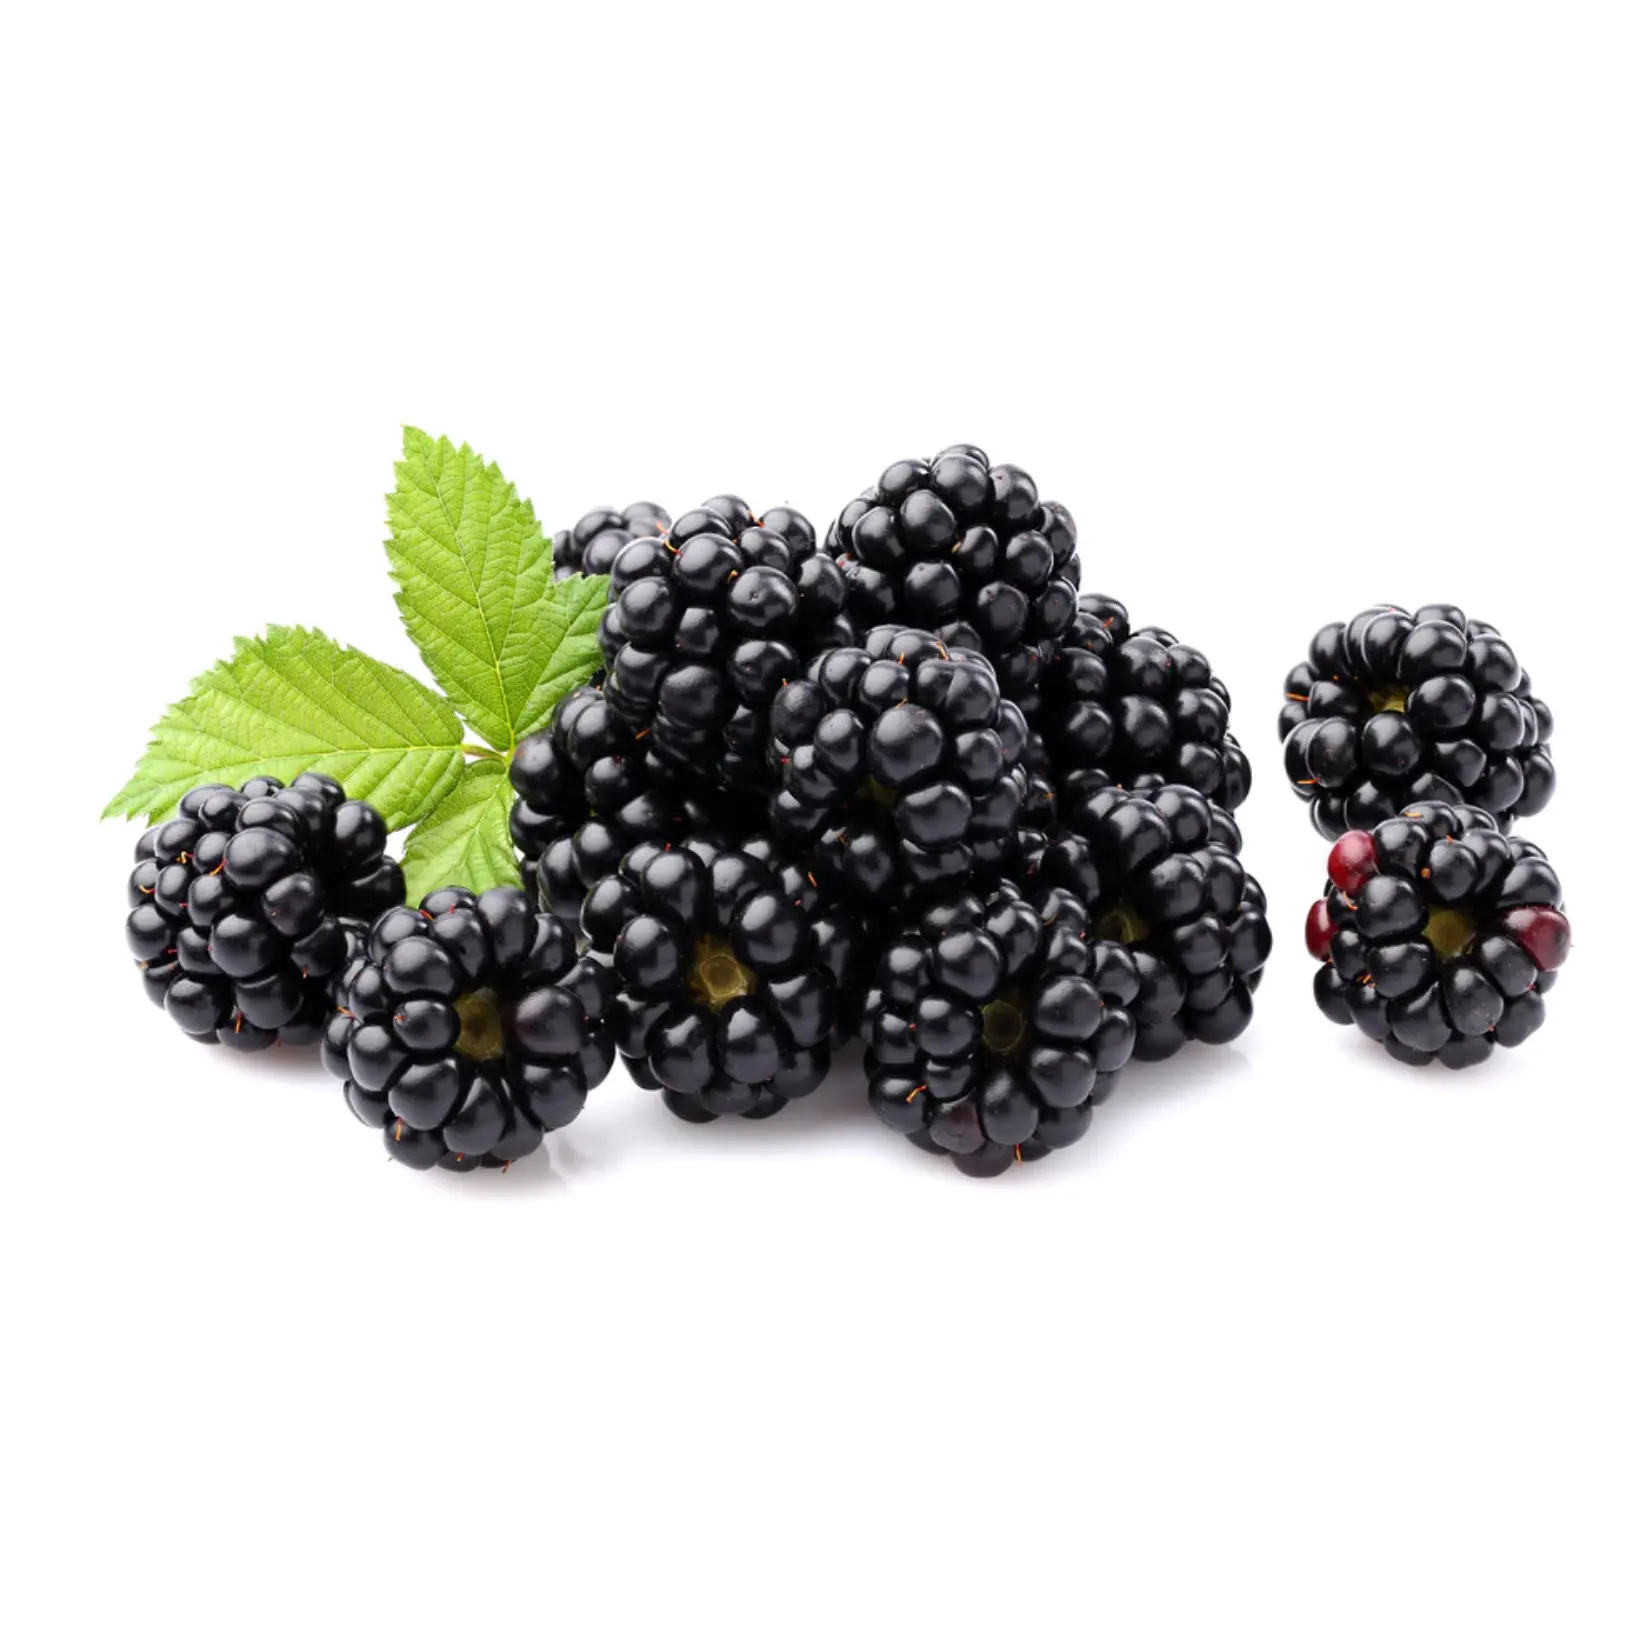 Cheap Price Bulk Stock Fresh Fruits Blackberries For Sale In Bulk With Fast Delivery